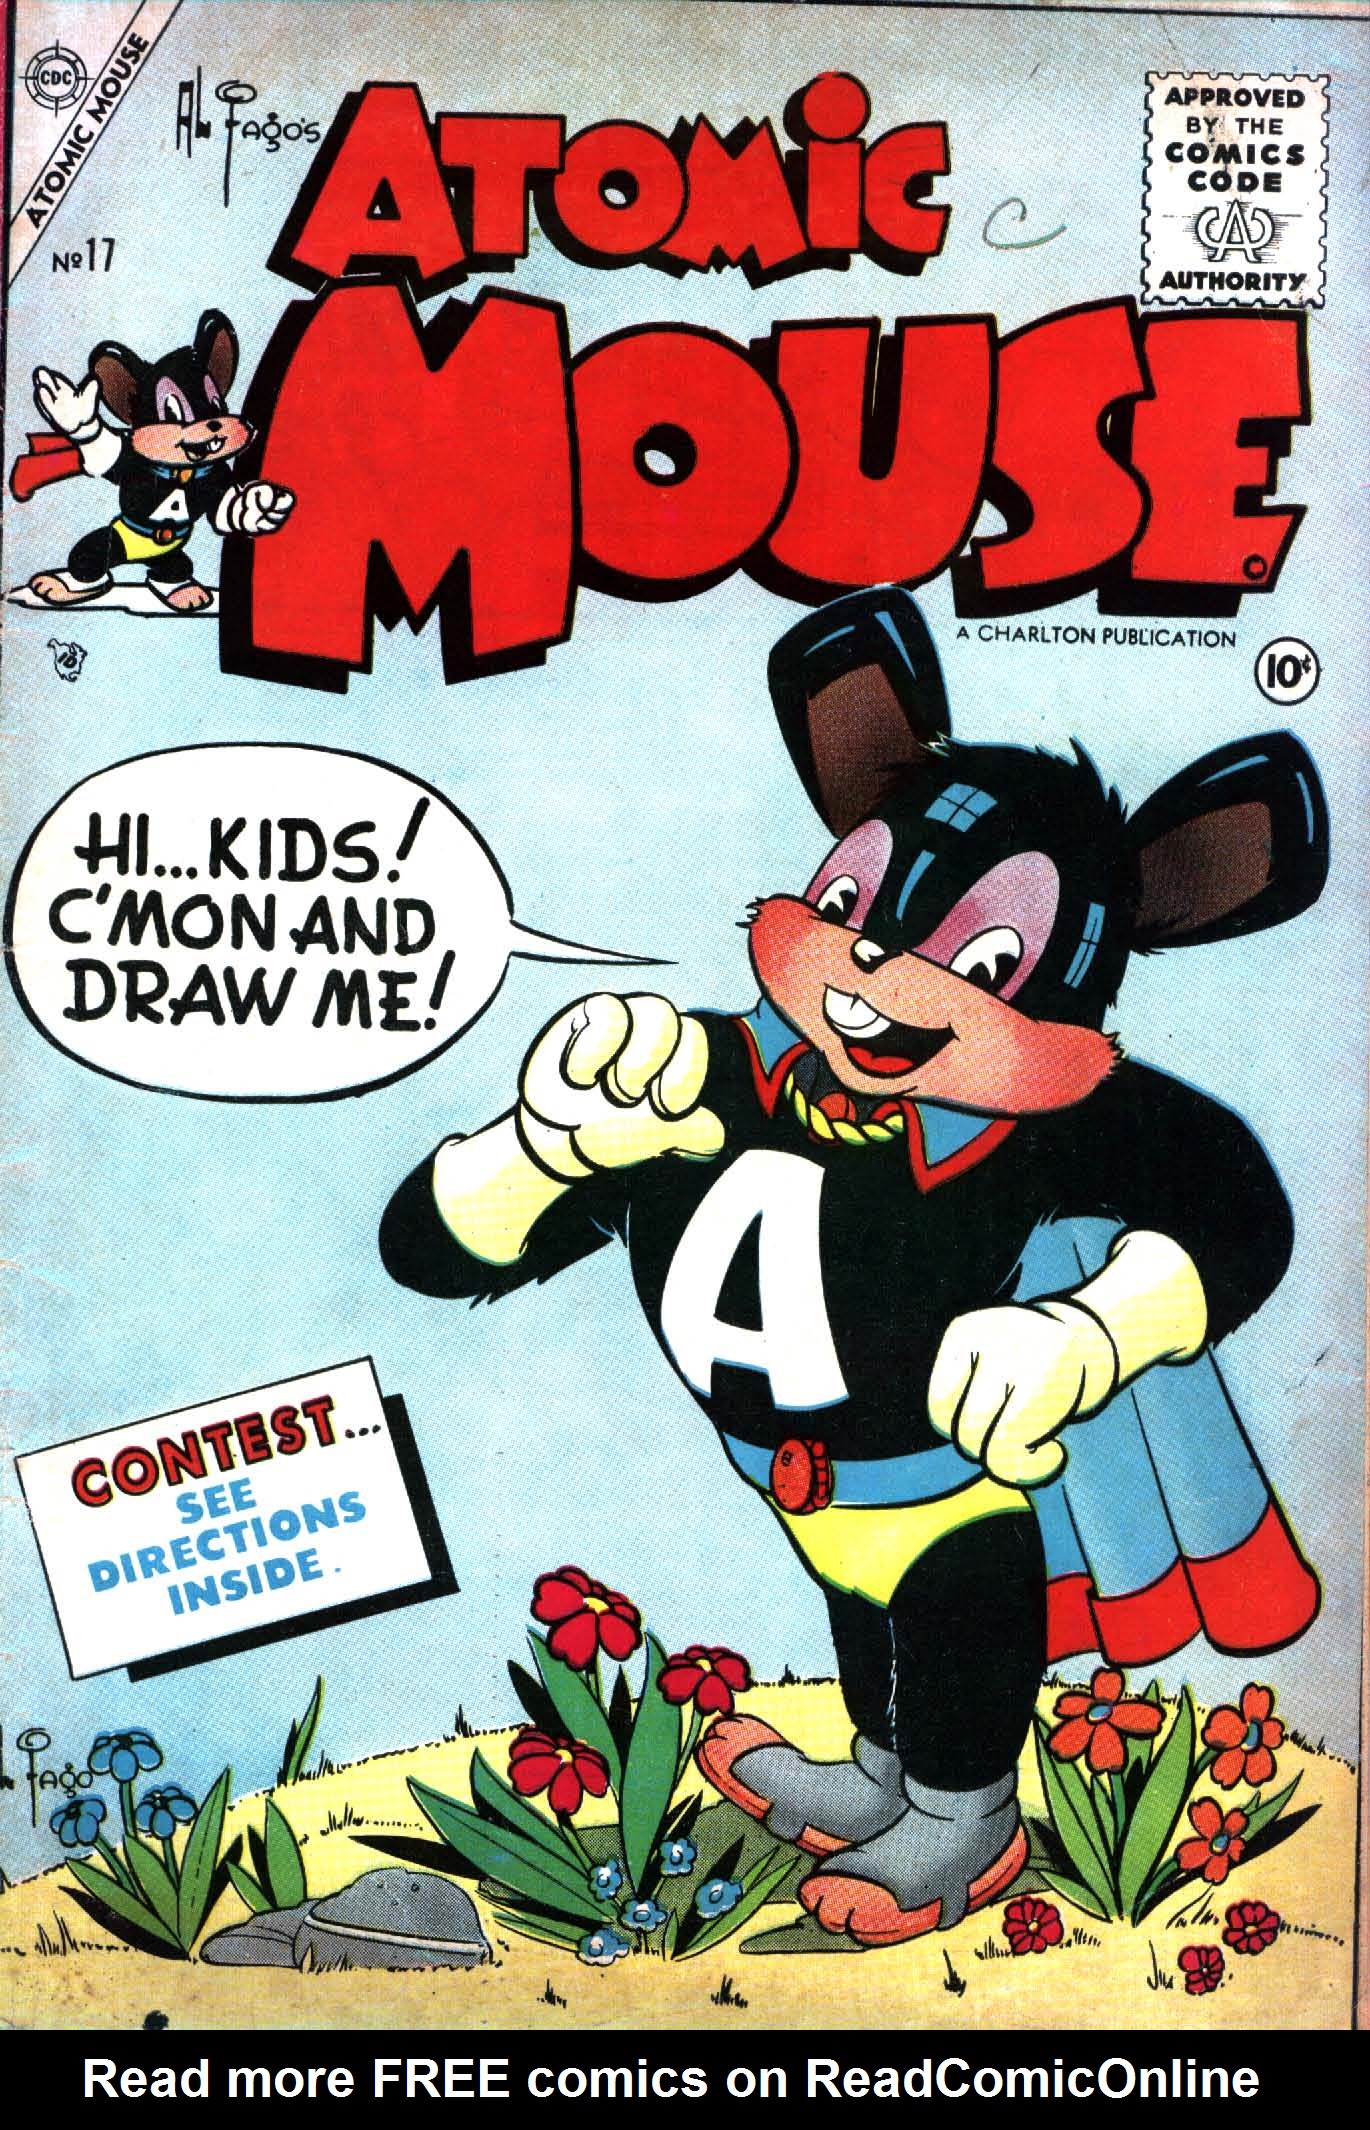 Read online Atomic Mouse comic -  Issue #17 - 1